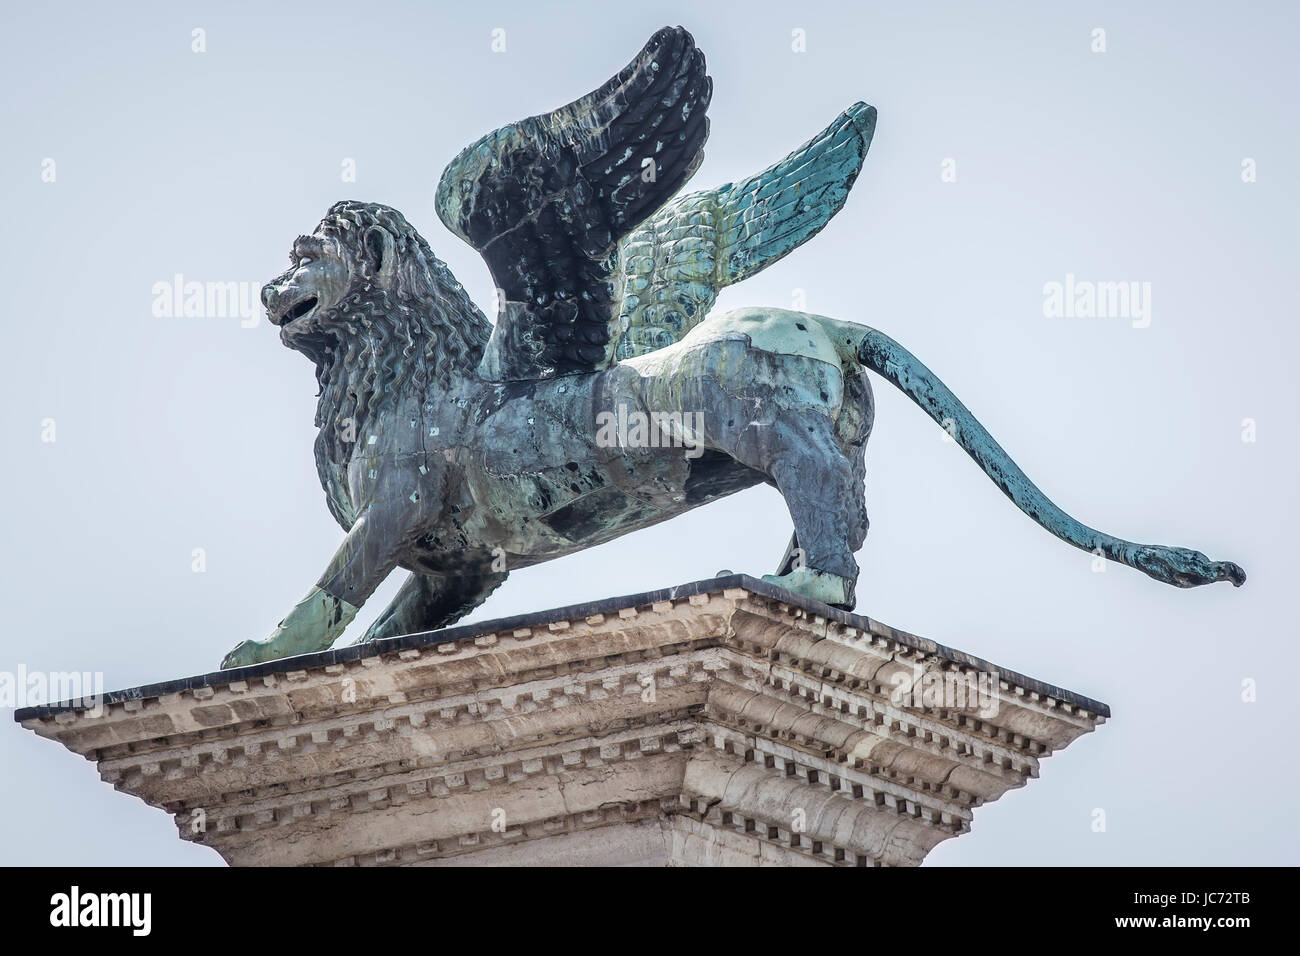 An image of a beautiful lion sculpture in Venice Italy Stock Photo